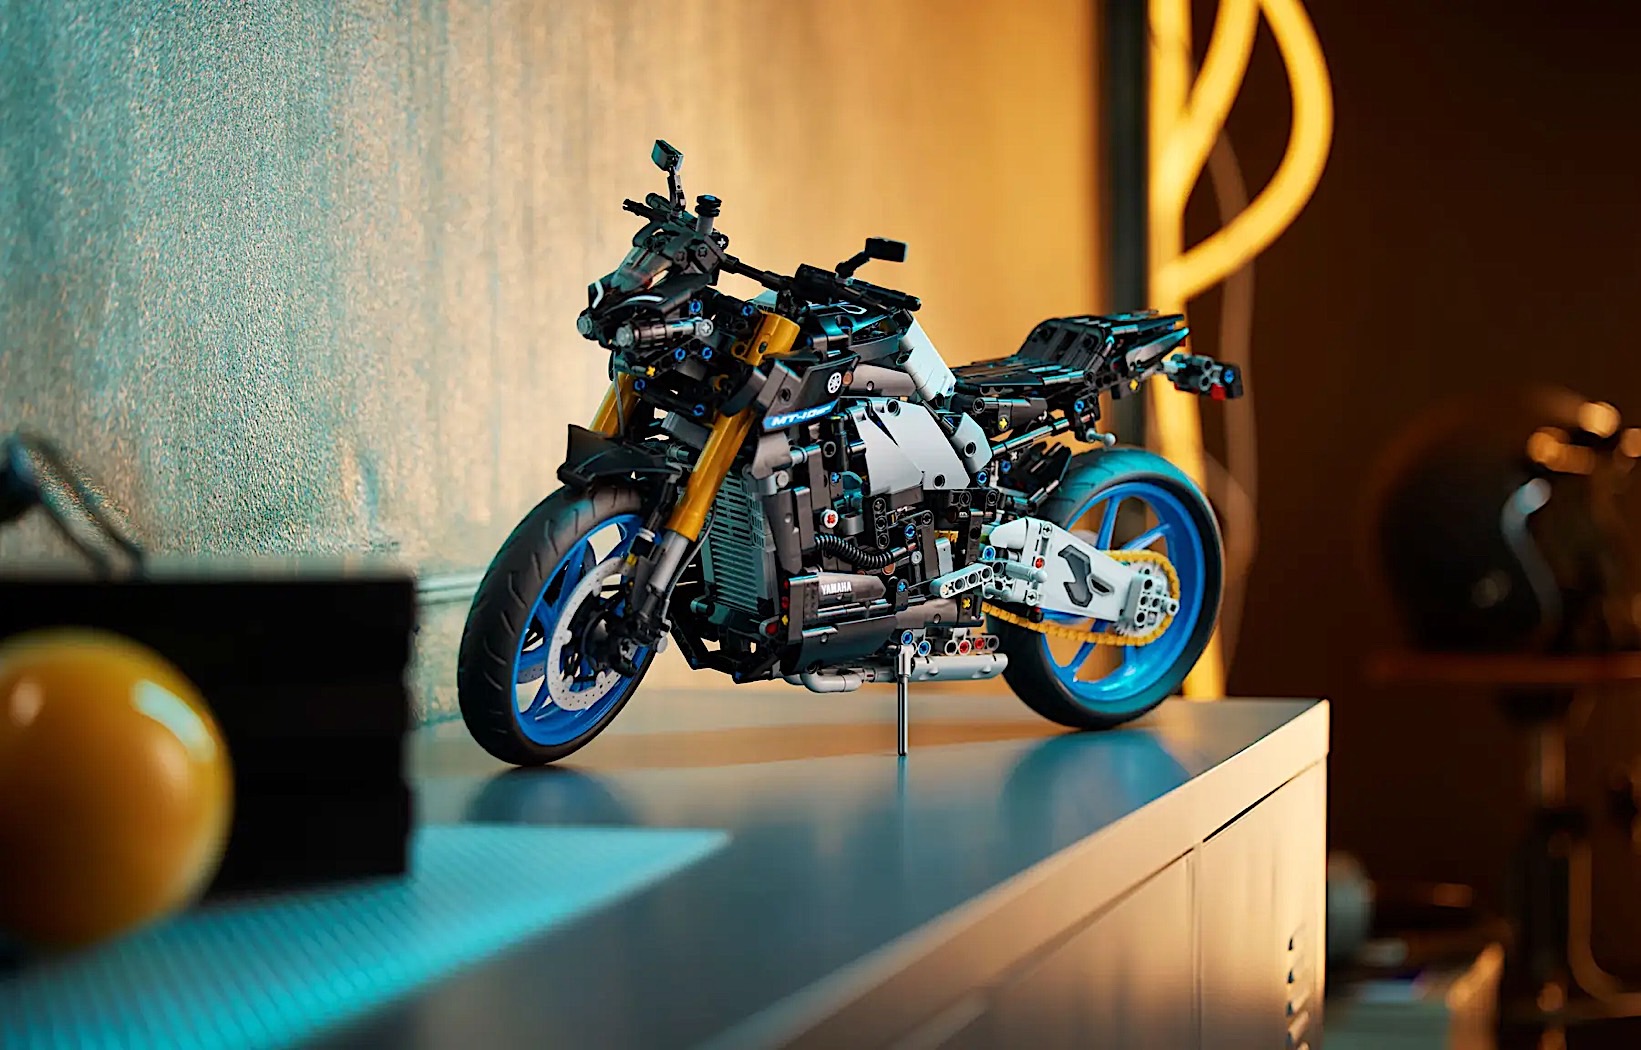 yamaha mt 10 sp comes together from 1478 lego pieces just as aggressive as the real deal 217943 1